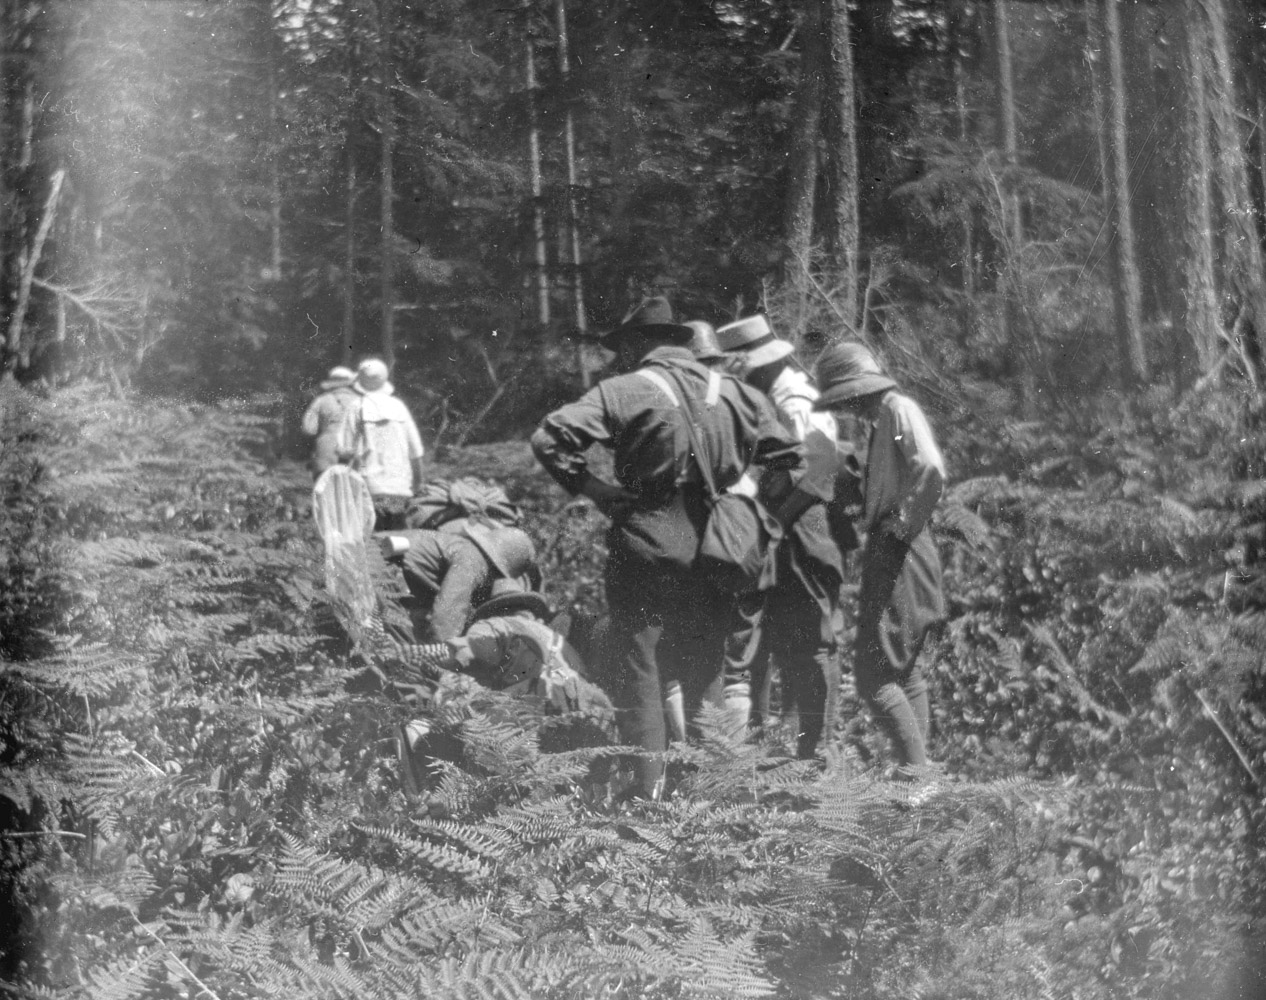 1913 - 1925 - Unidentified group in the woods